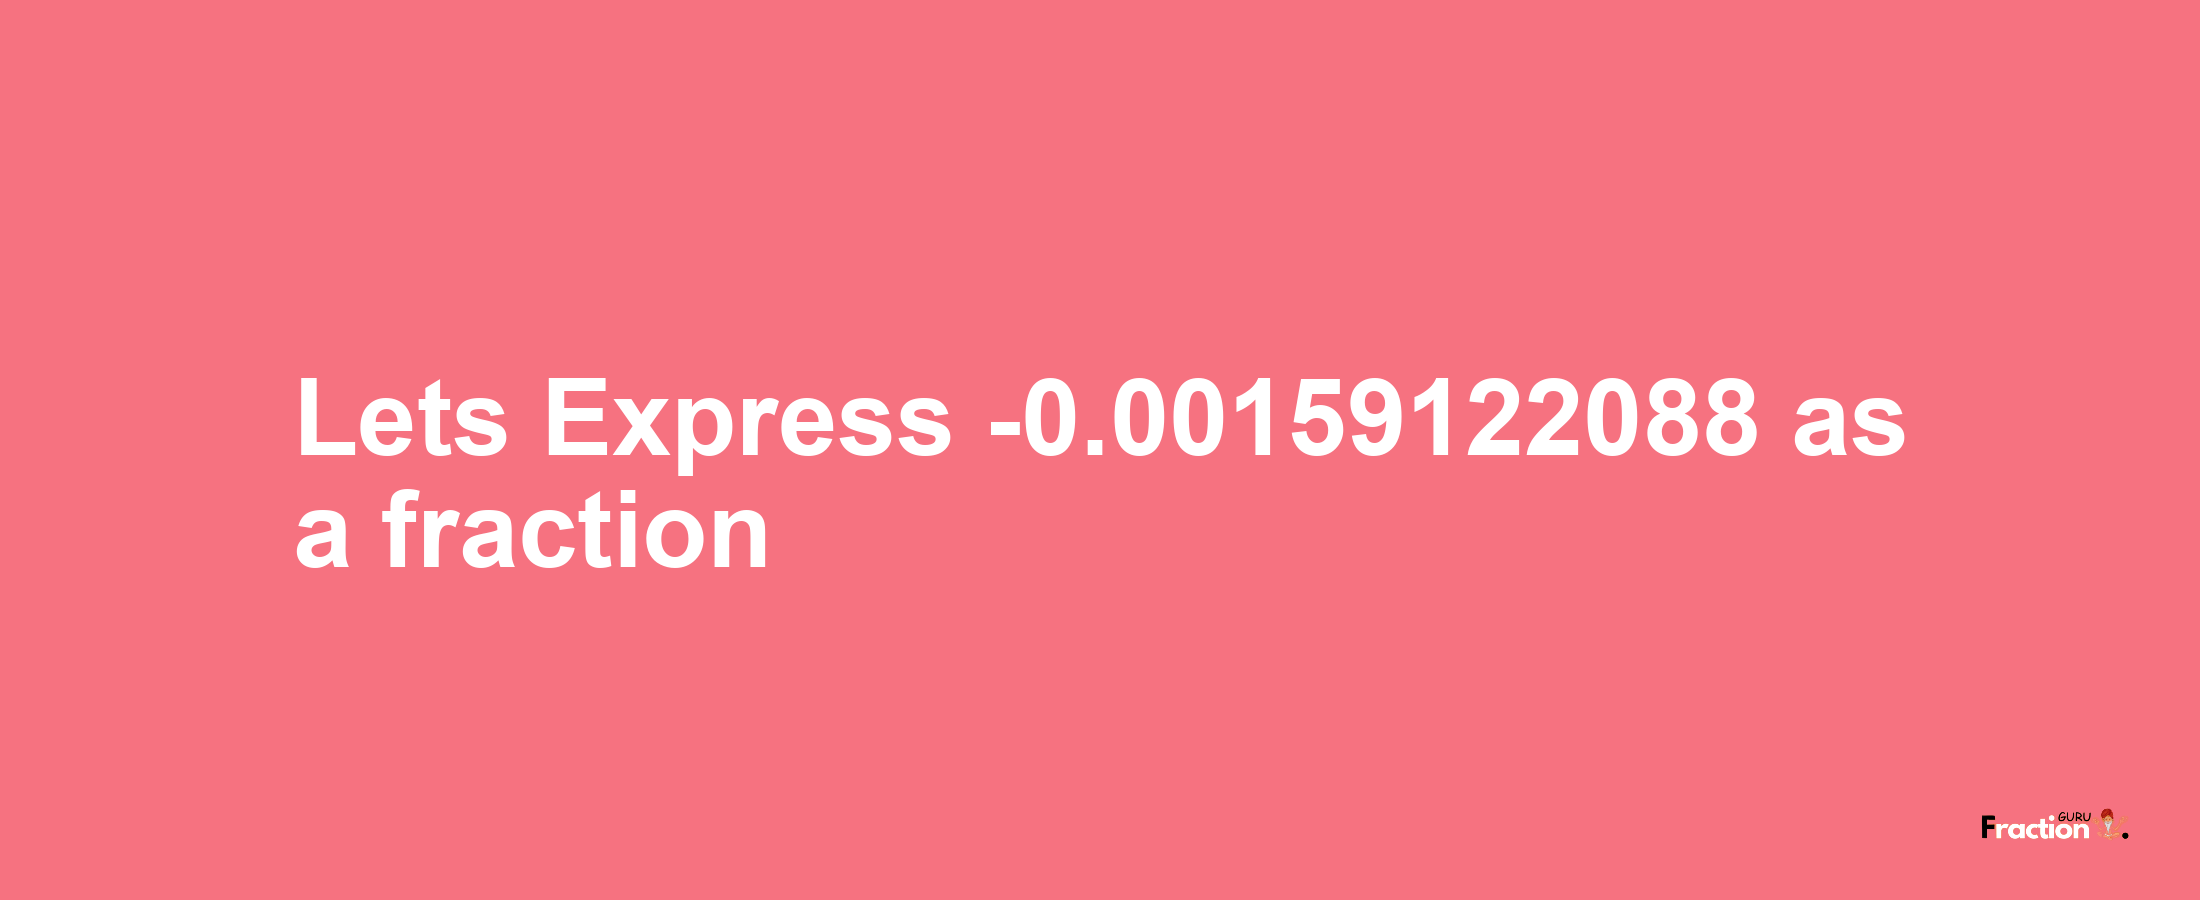 Lets Express -0.00159122088 as afraction